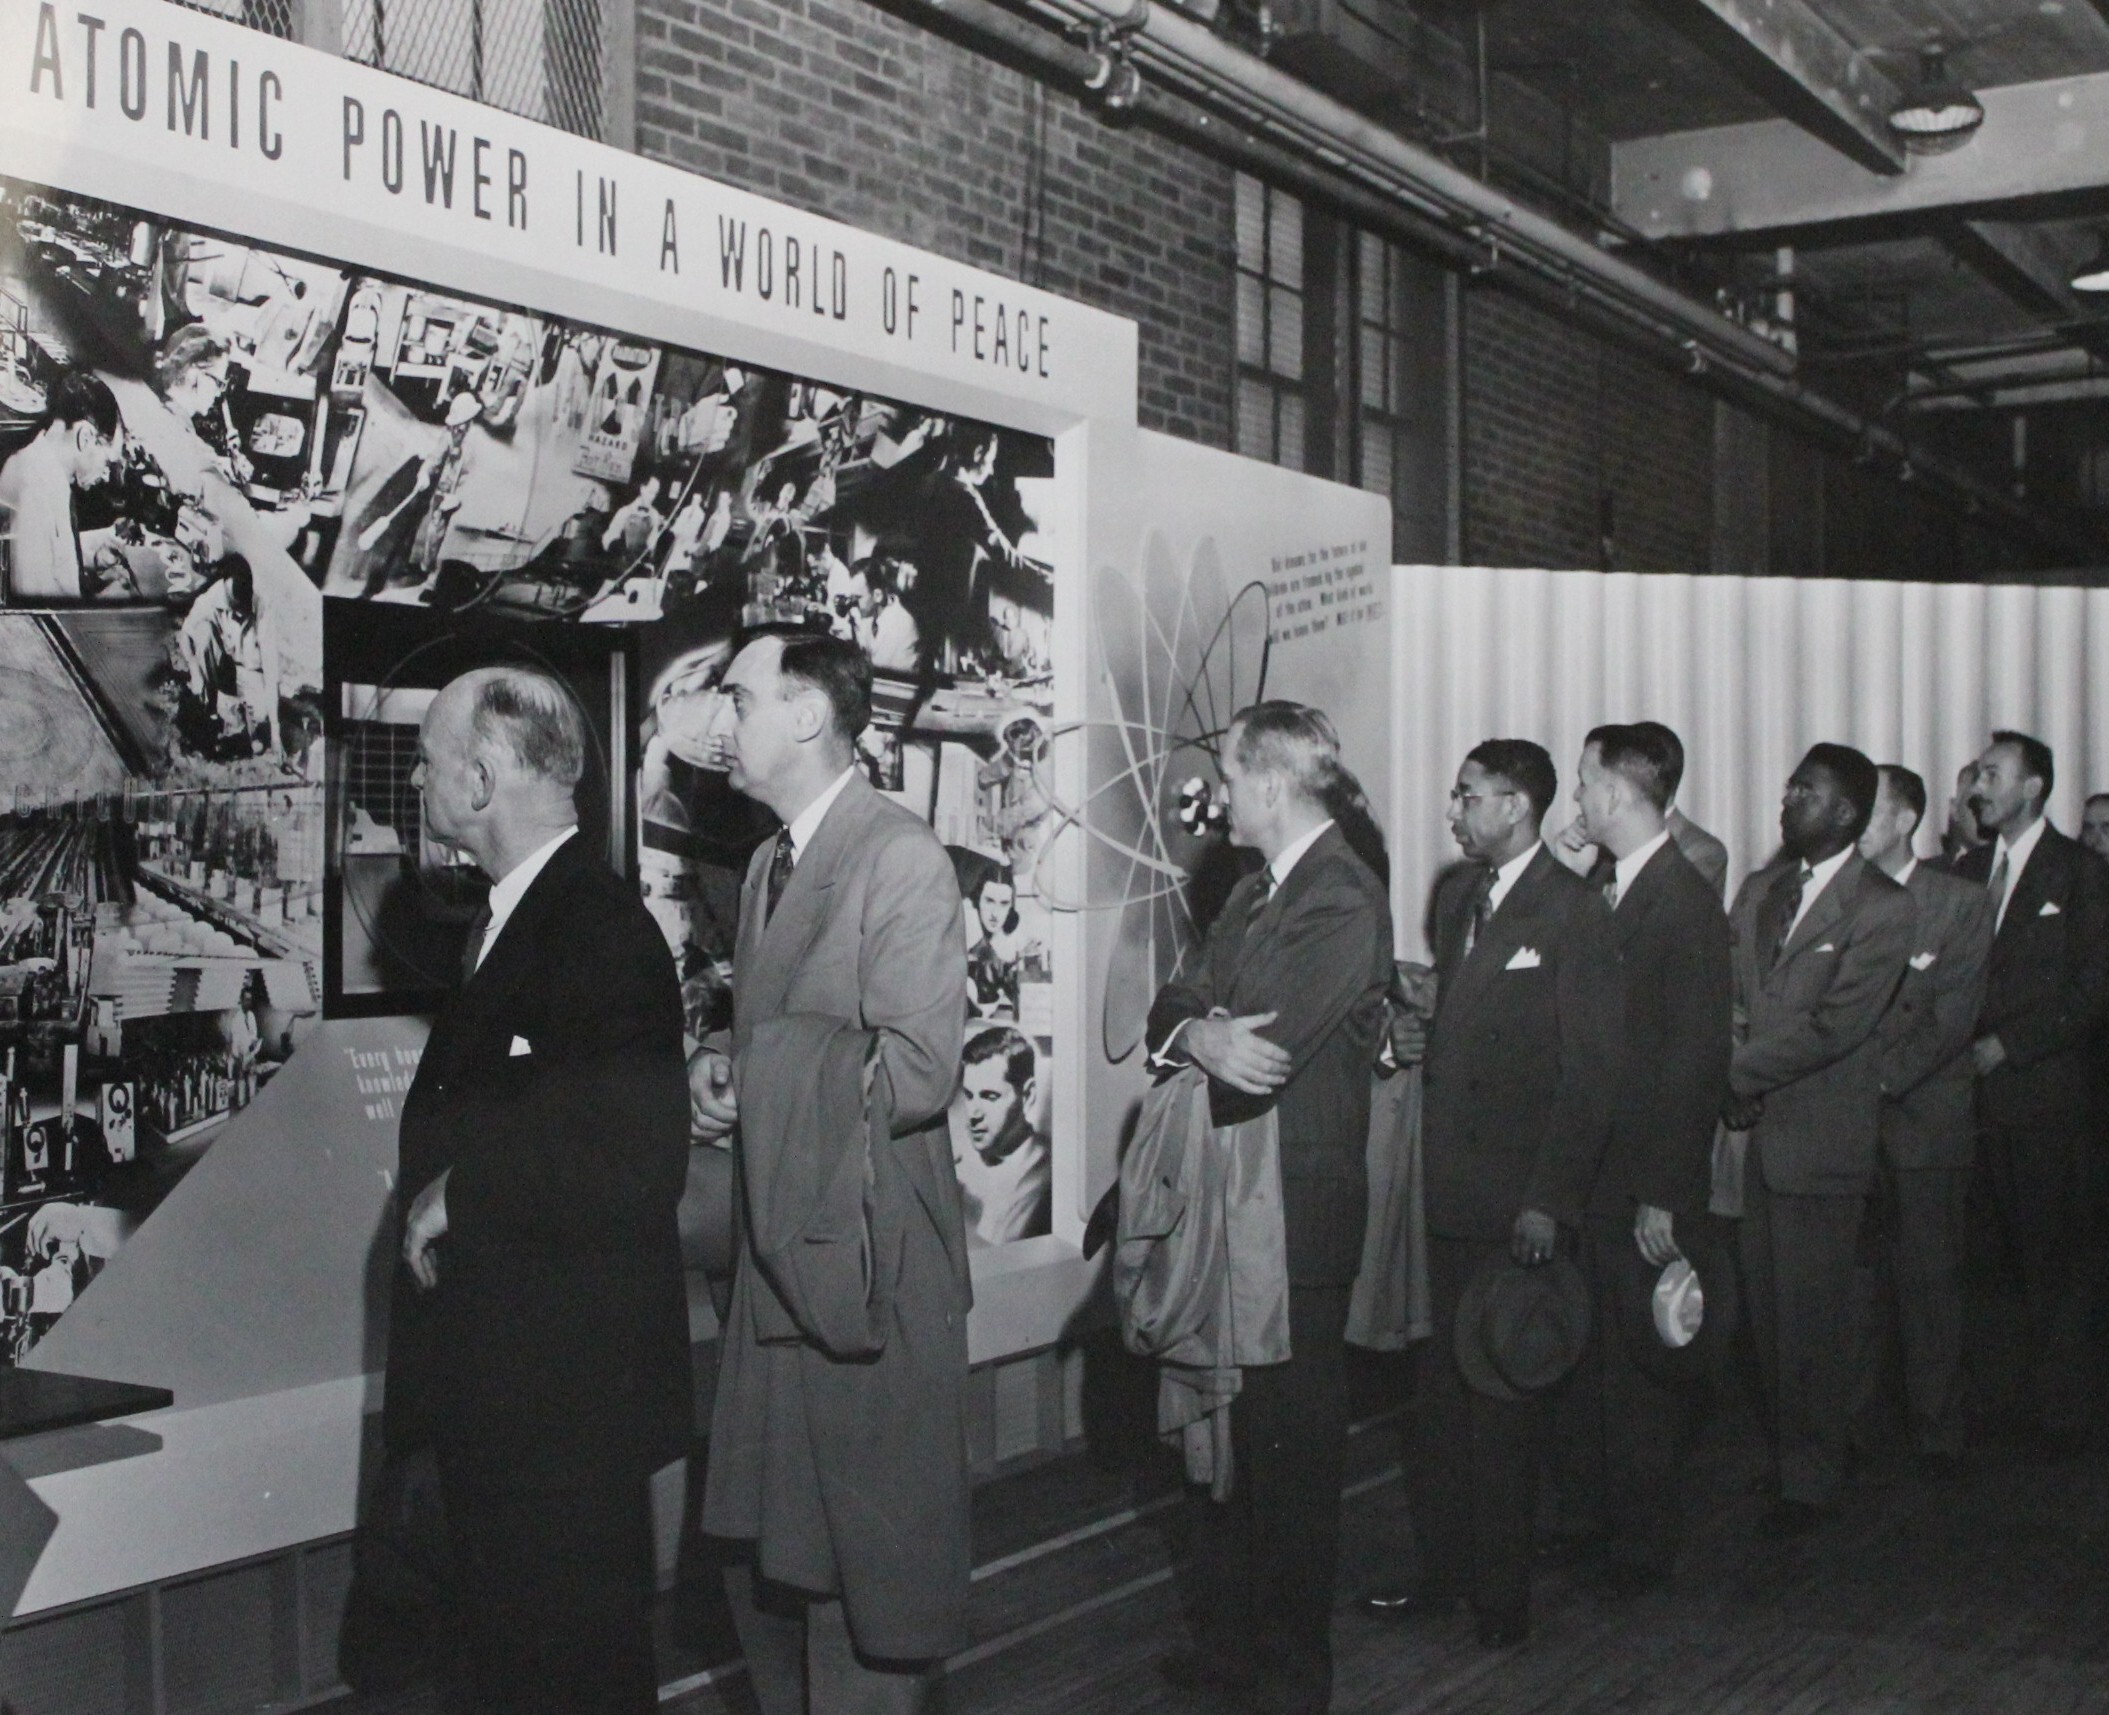 Americans view an exhibit on atomic power.